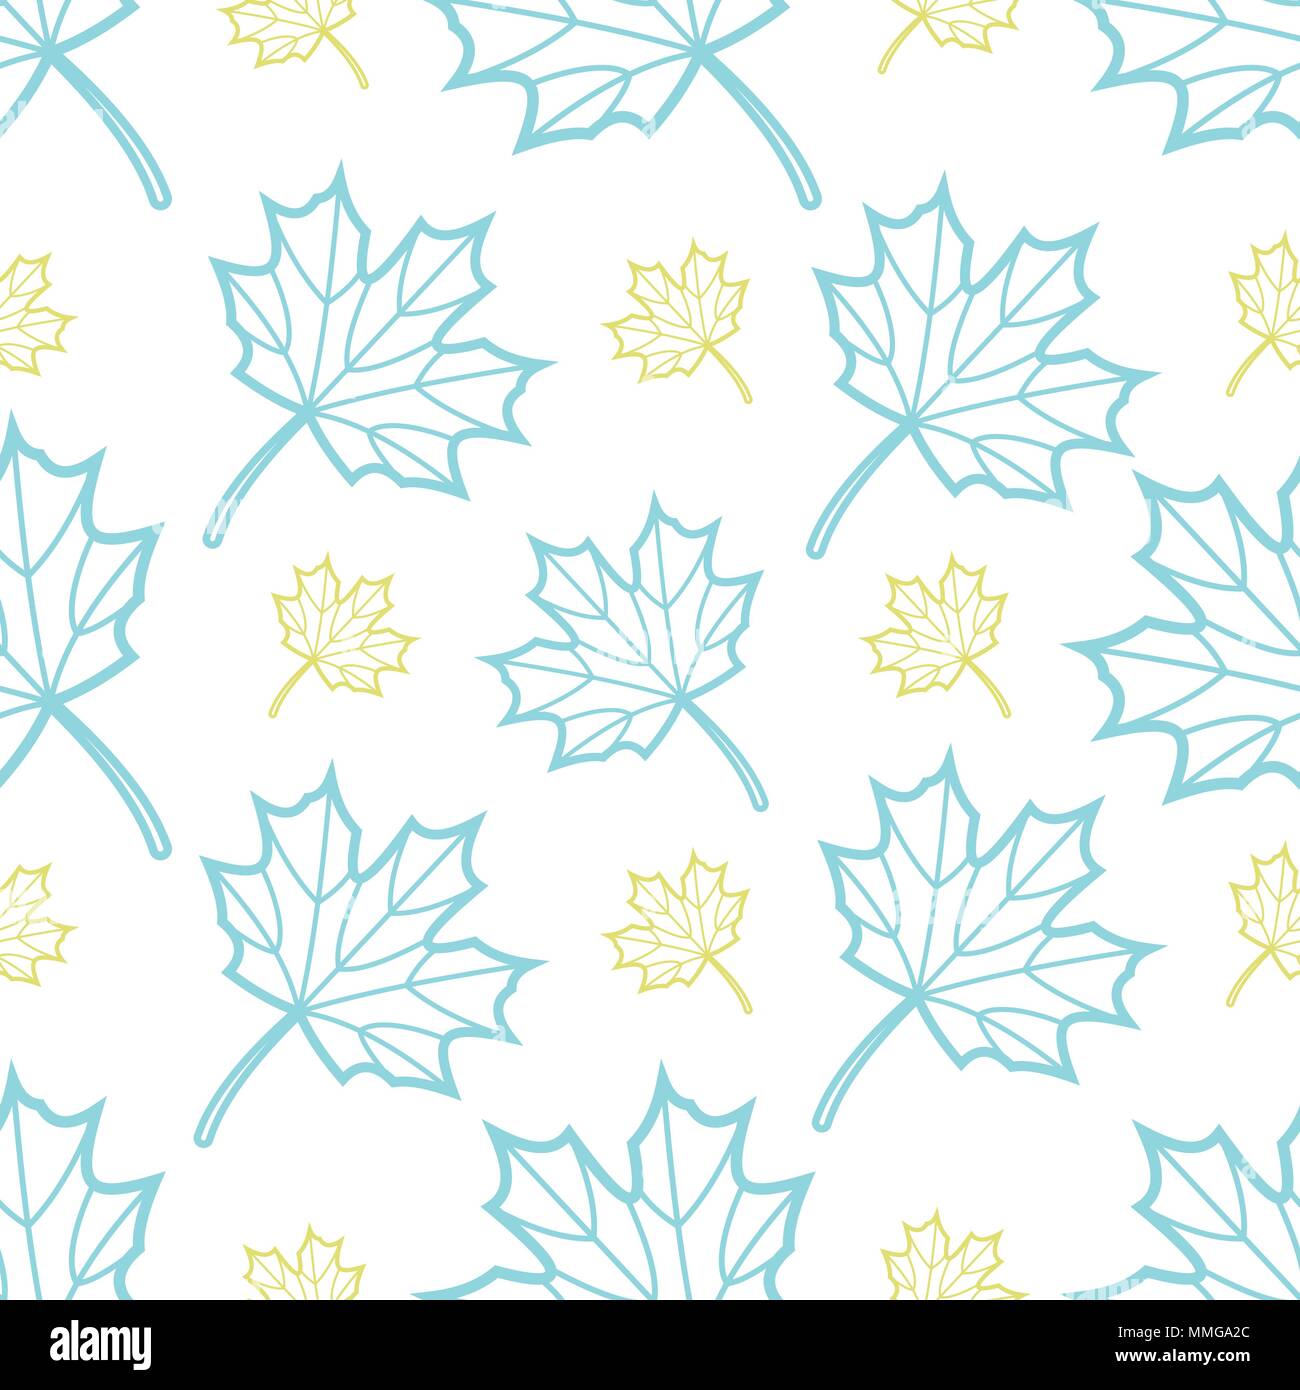 Cute blue and gold outline maple leaves random on white background. Seamless pattern background design for Autumn or Fall in vector illustration. Stock Vector